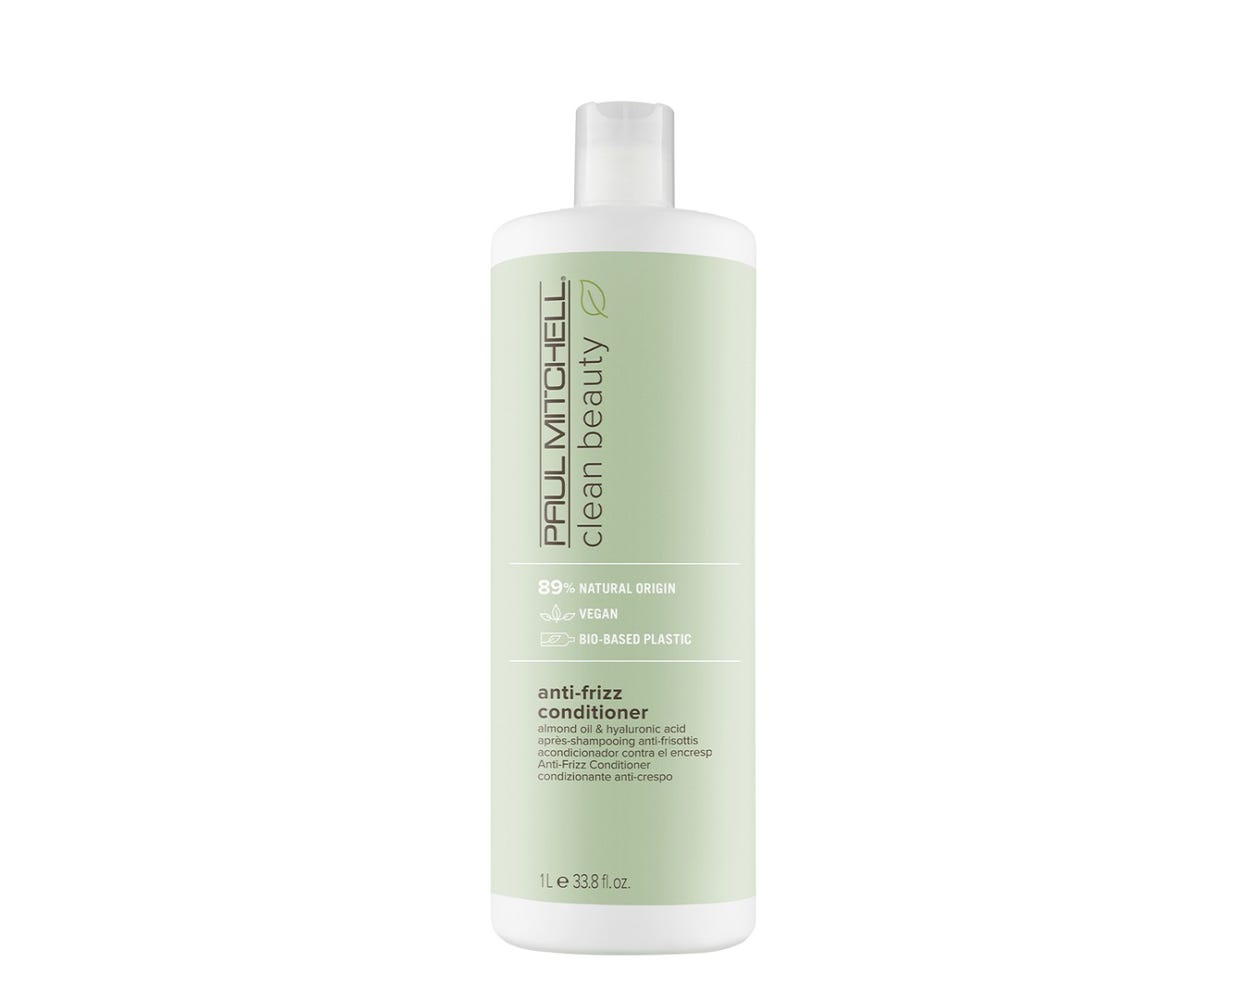 CLEAN BEAUTY - SMOOTH Anti-Frizz Conditioner